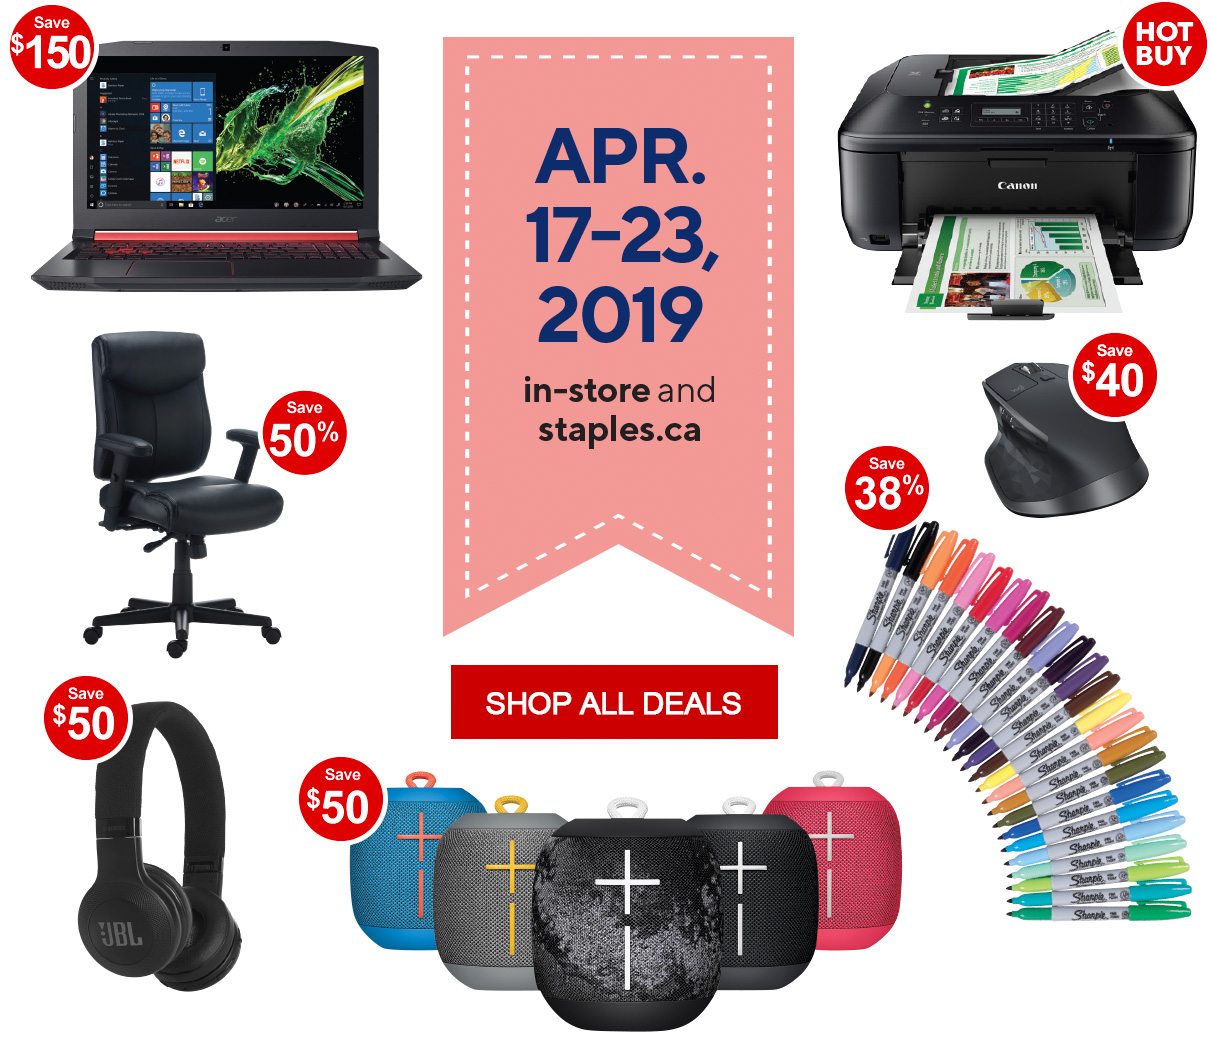 APR. 17-23 , 2019 - in-store and staples.ca - SHOP ALL DEALS